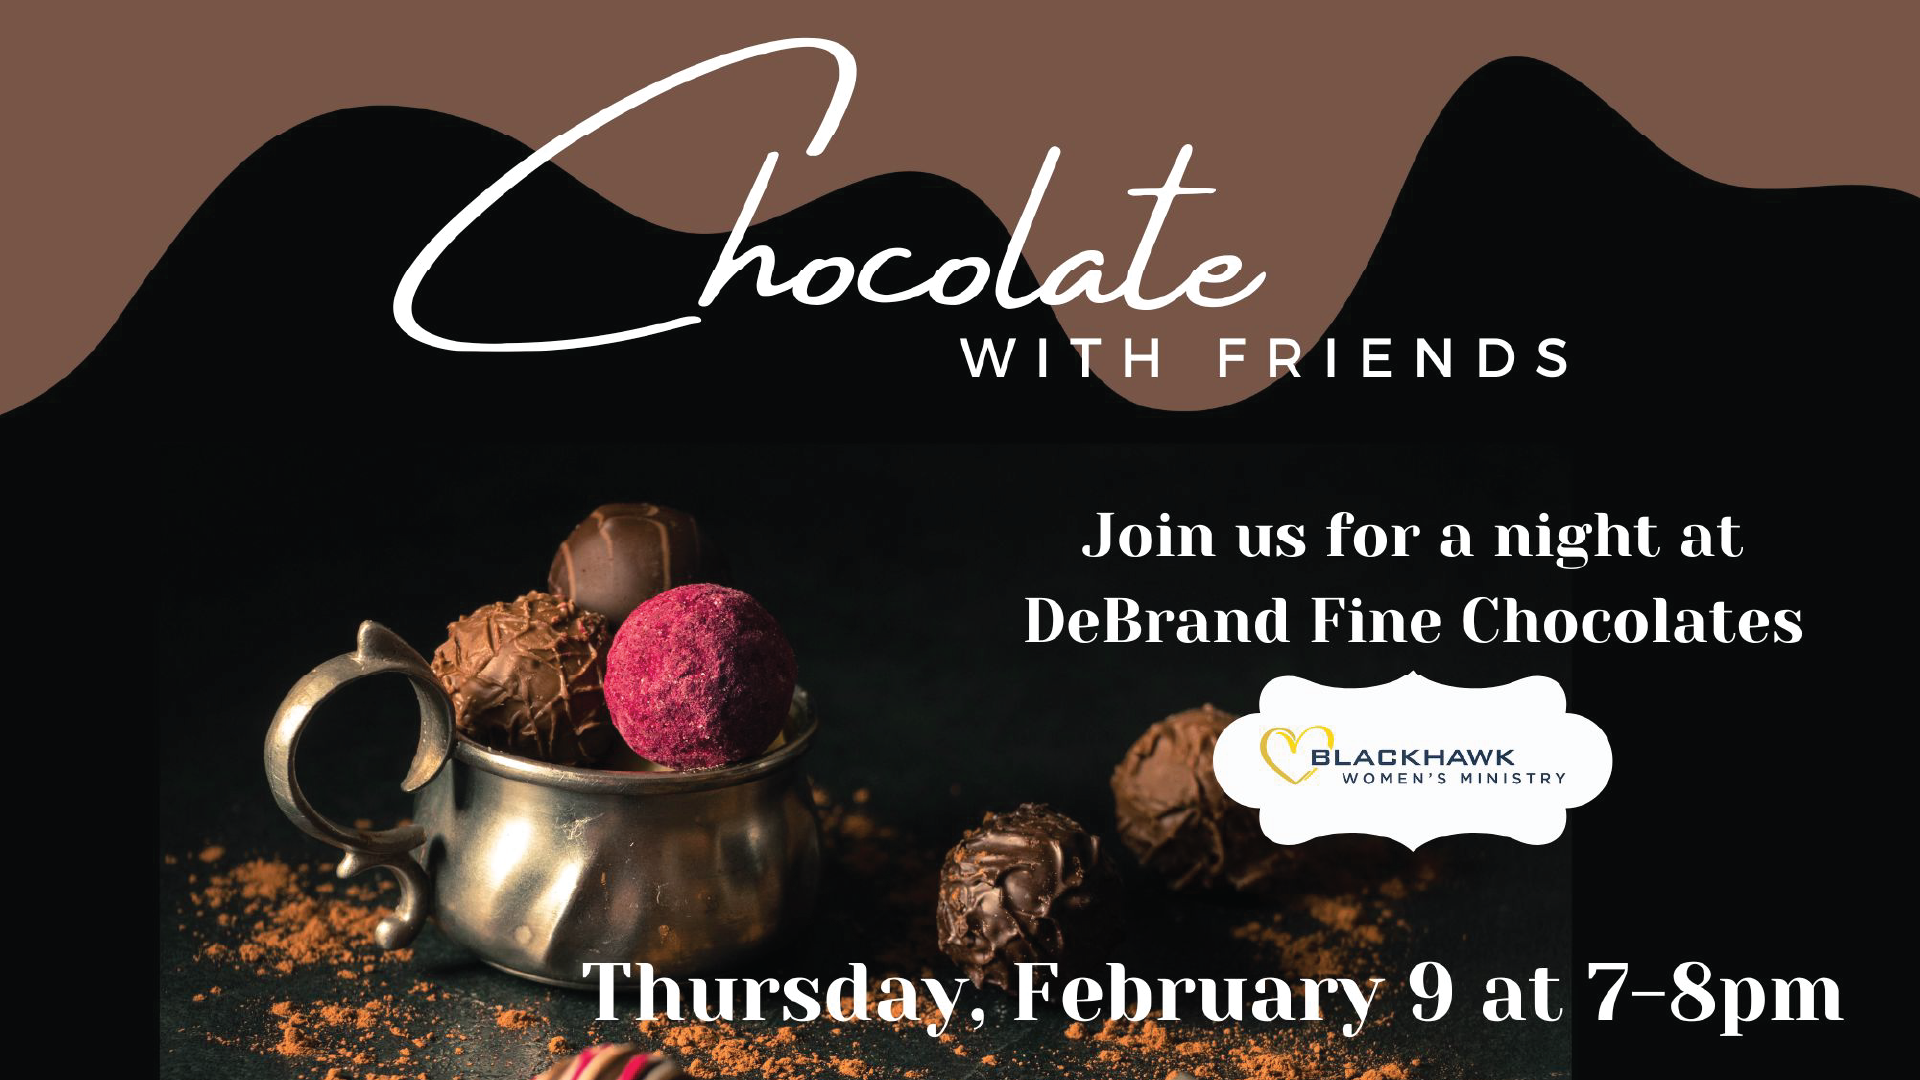 DeBrand Chocolate with Friends!